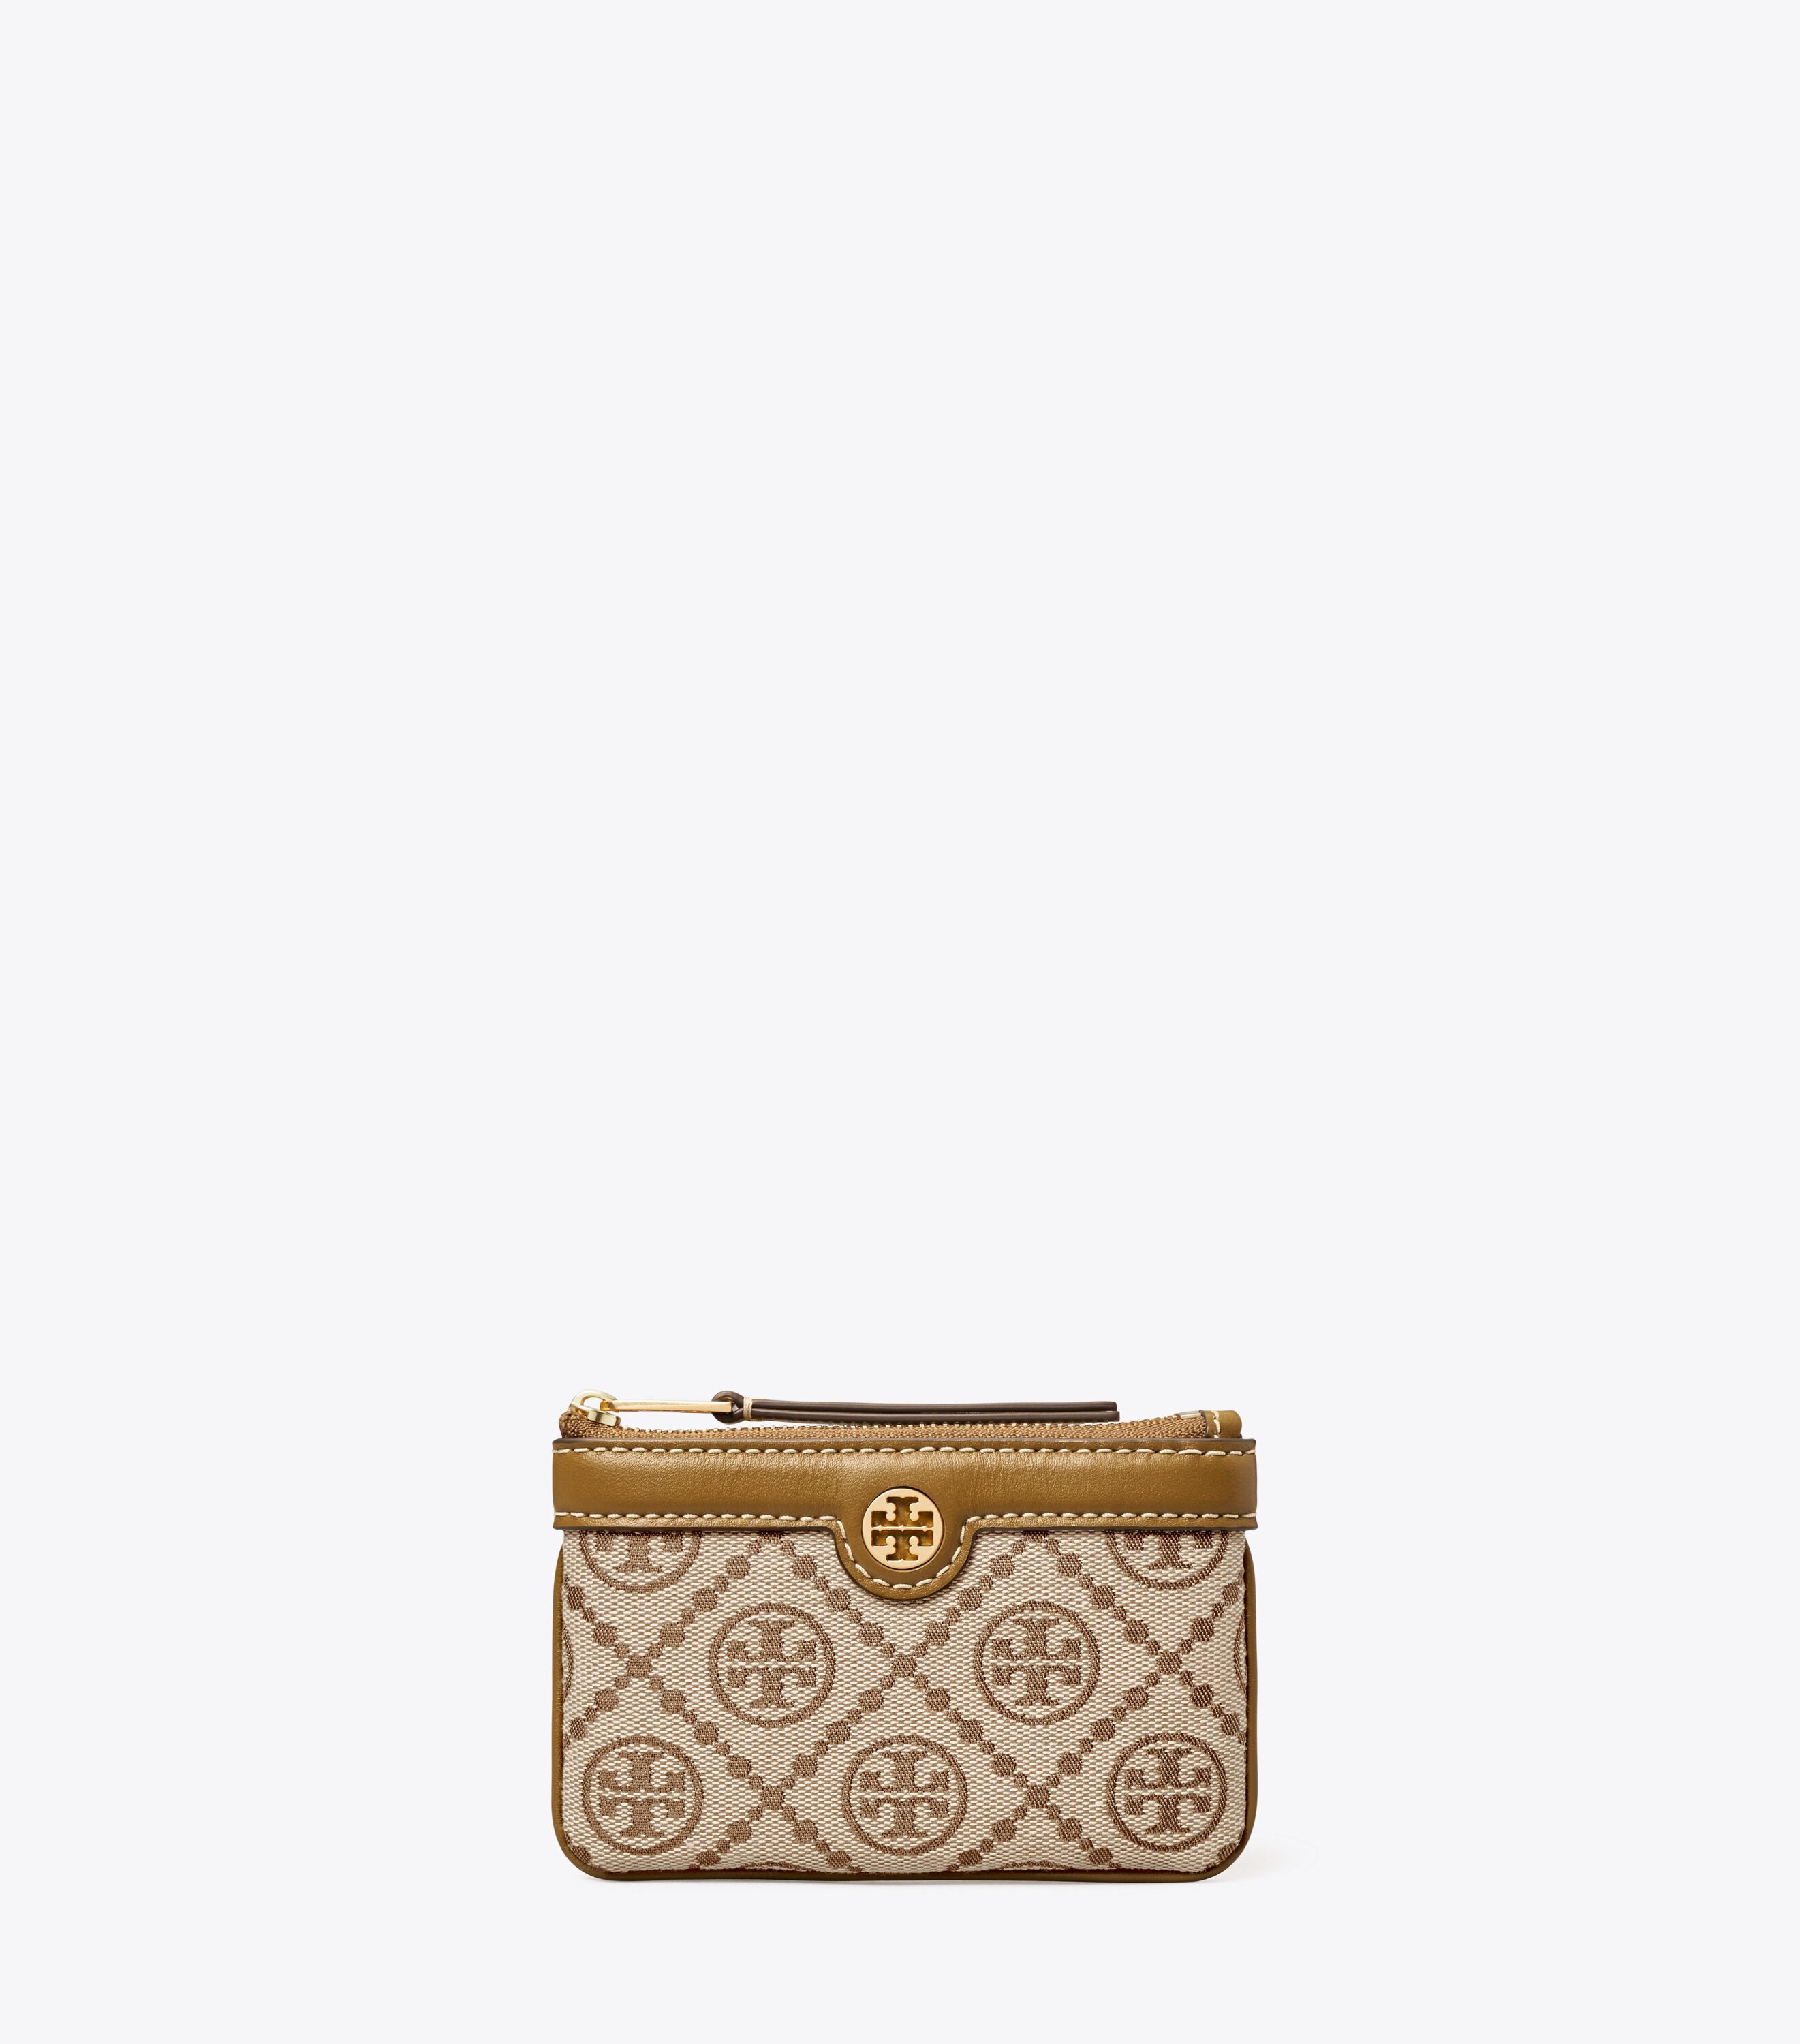 Featured | Tory Burch | Tory Burch KWT